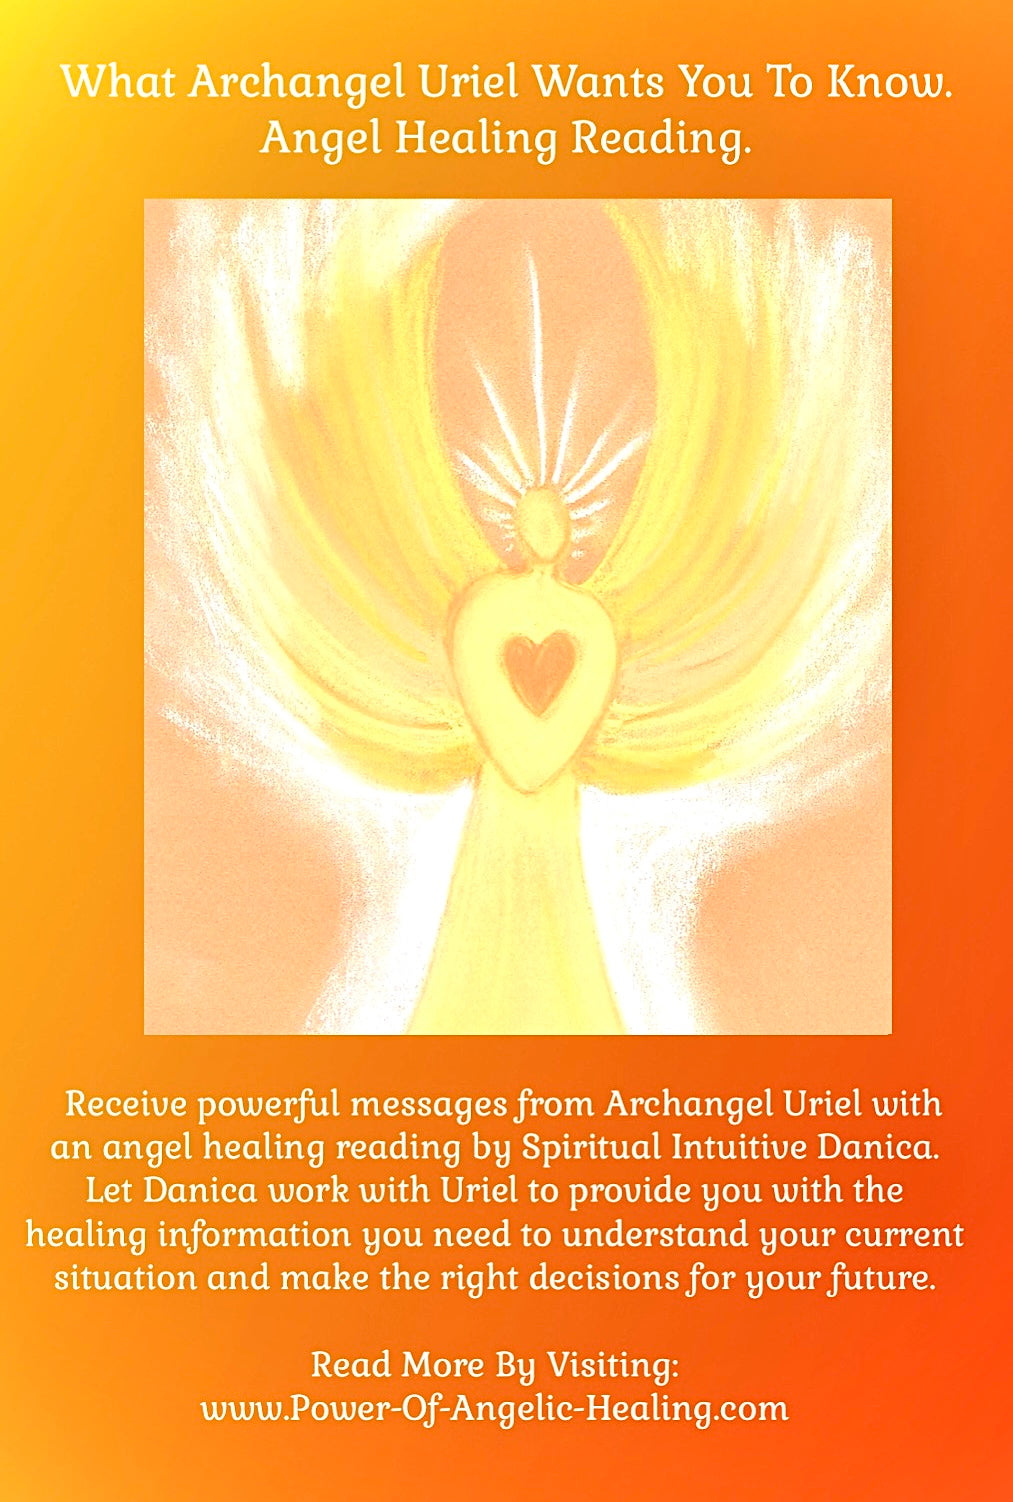 What Archangel Uriel Wants You To Know. Angel Healing Reading.